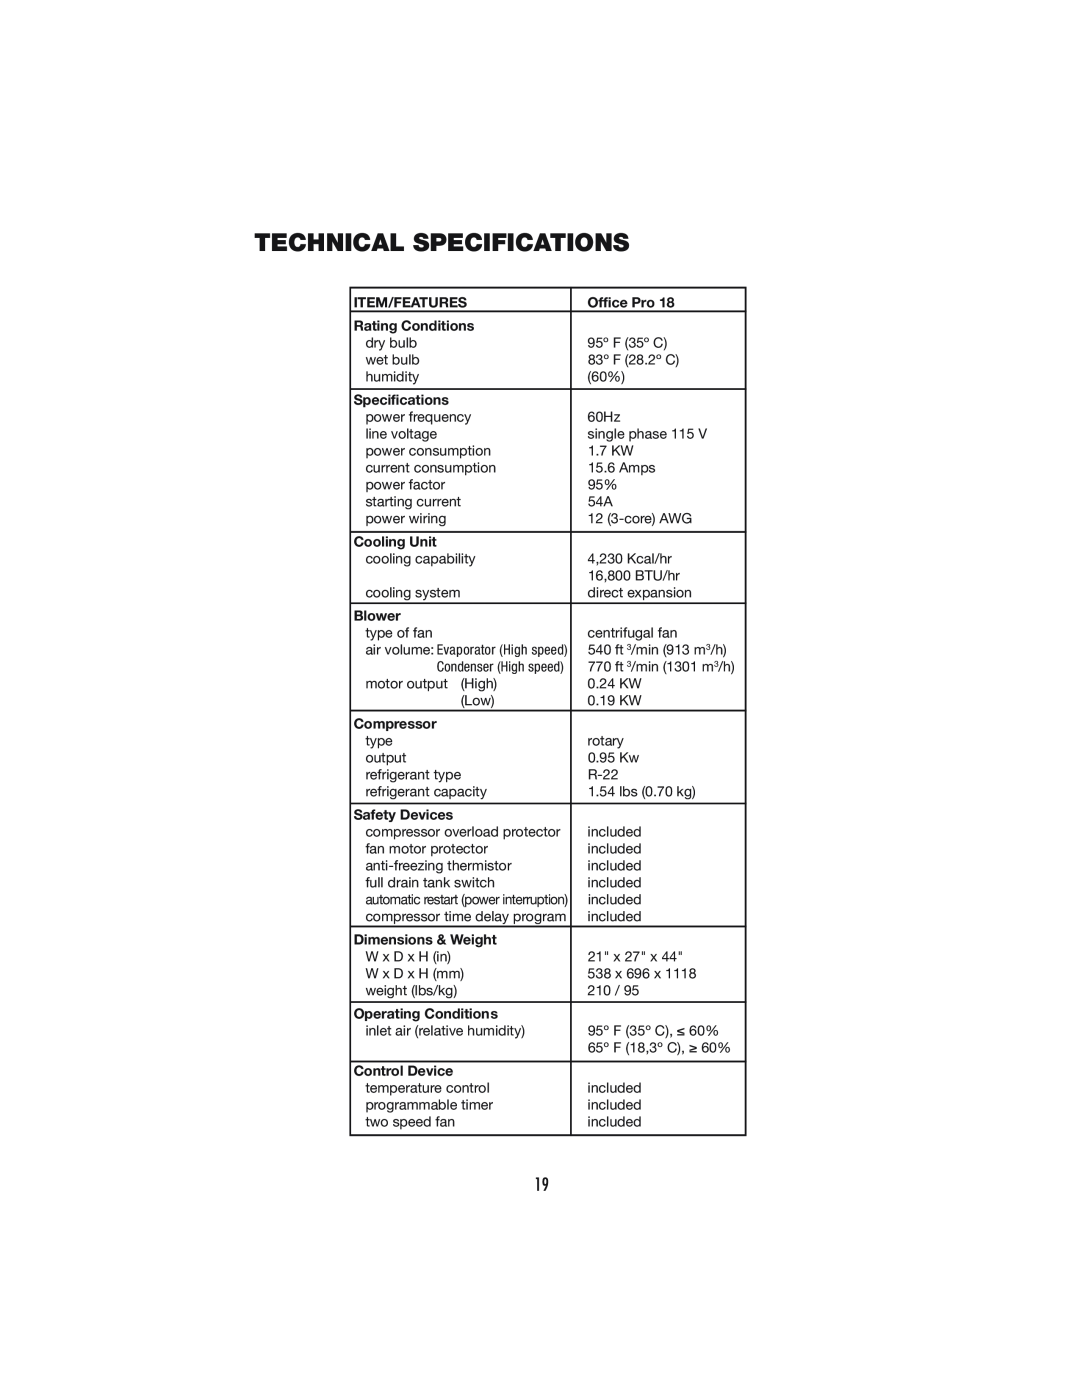 Denso PRO 18 operation manual Technical Specifications 